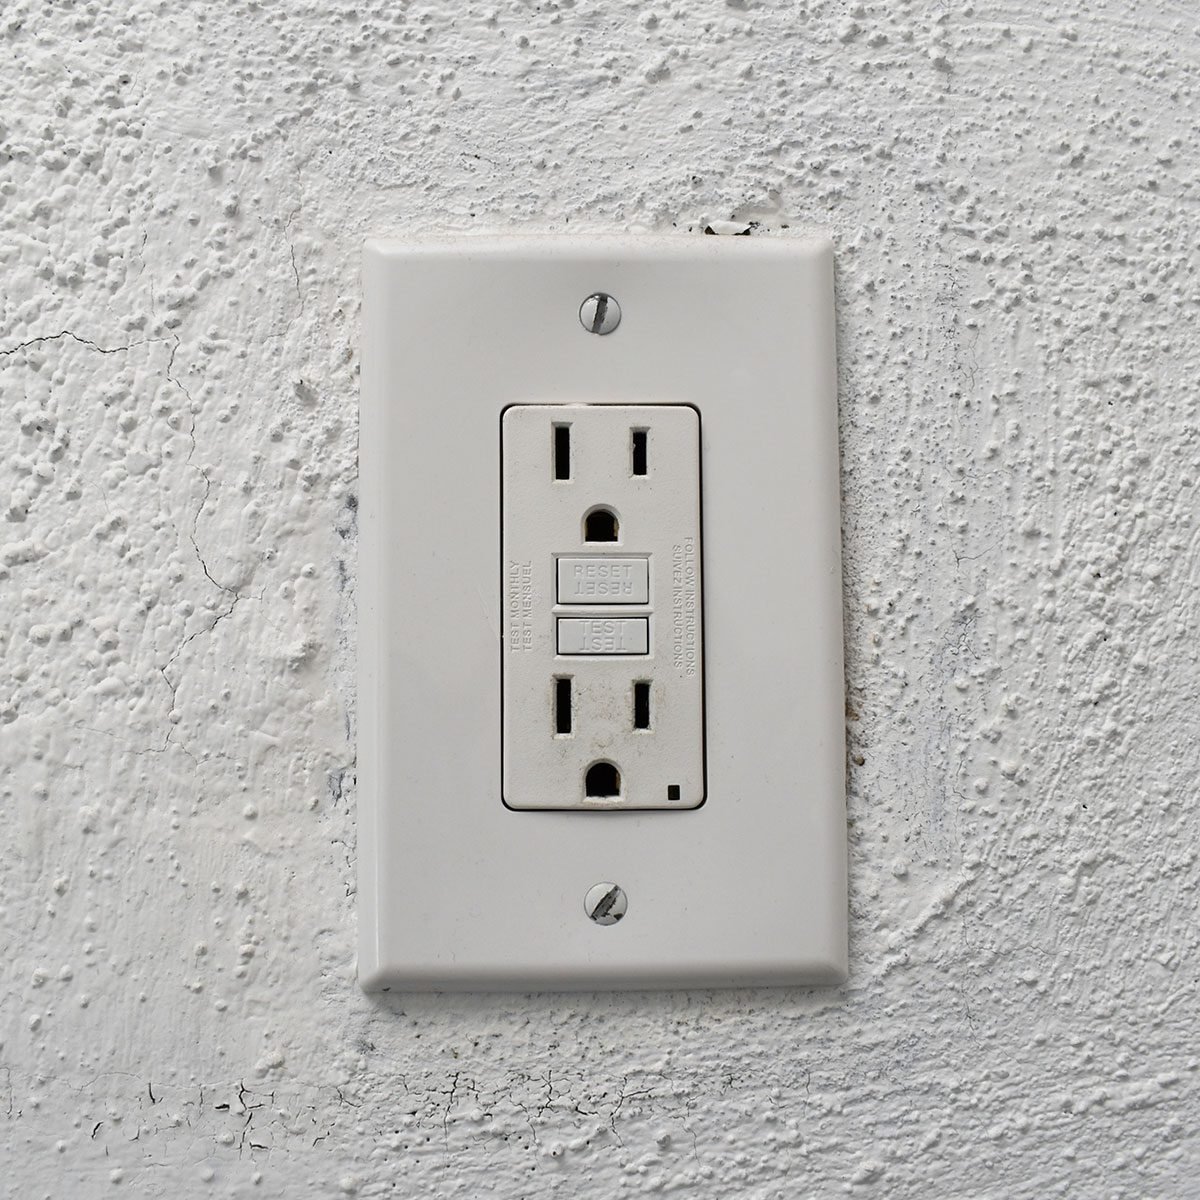 GFCI vs. AFCI Outlets: What's the Difference?